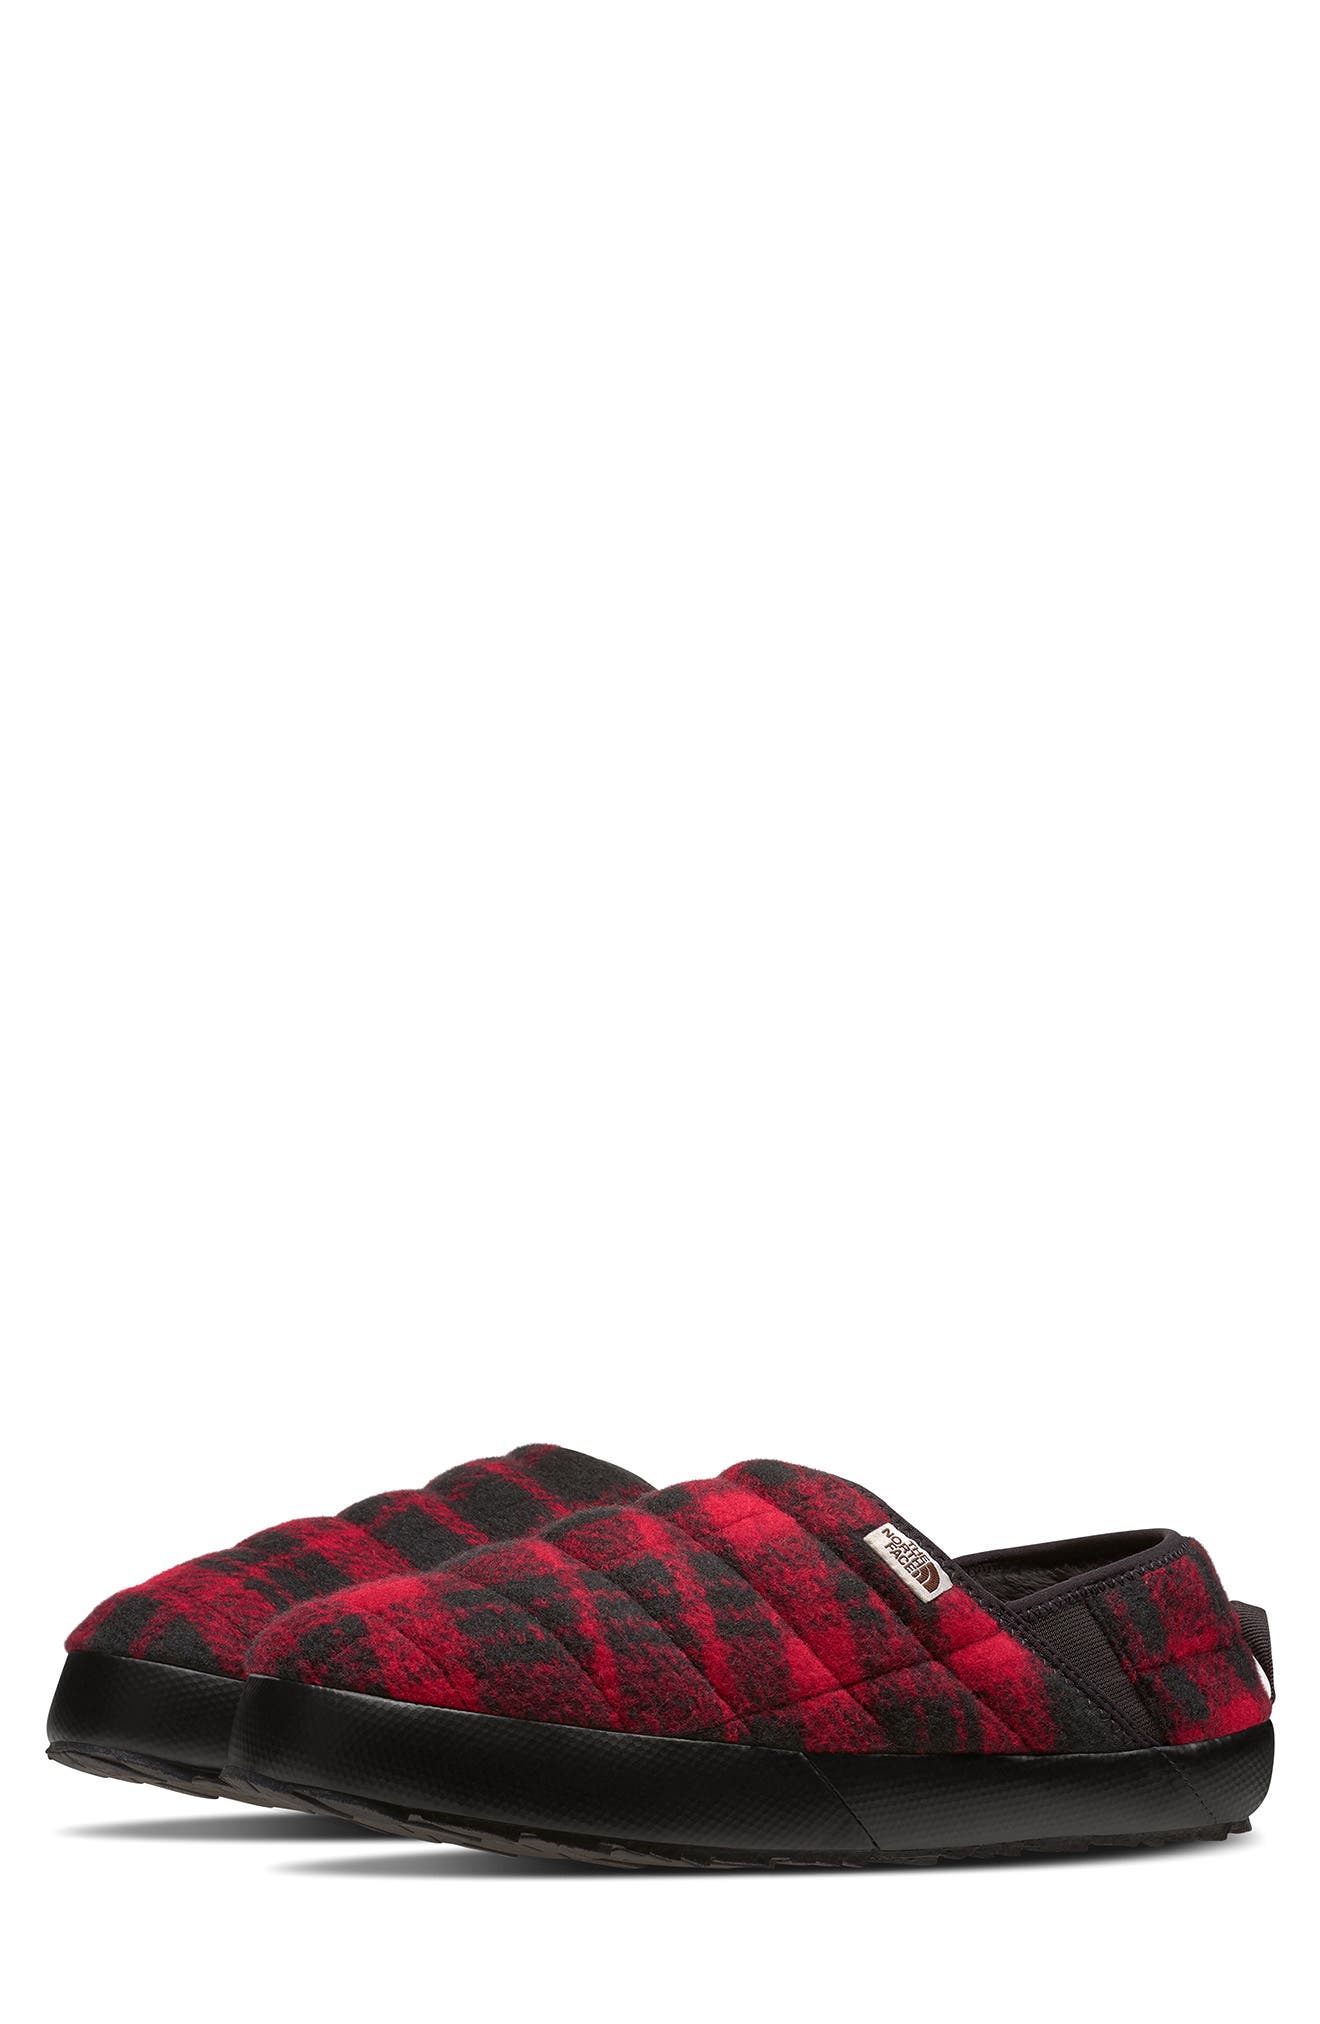 mens red house slippers